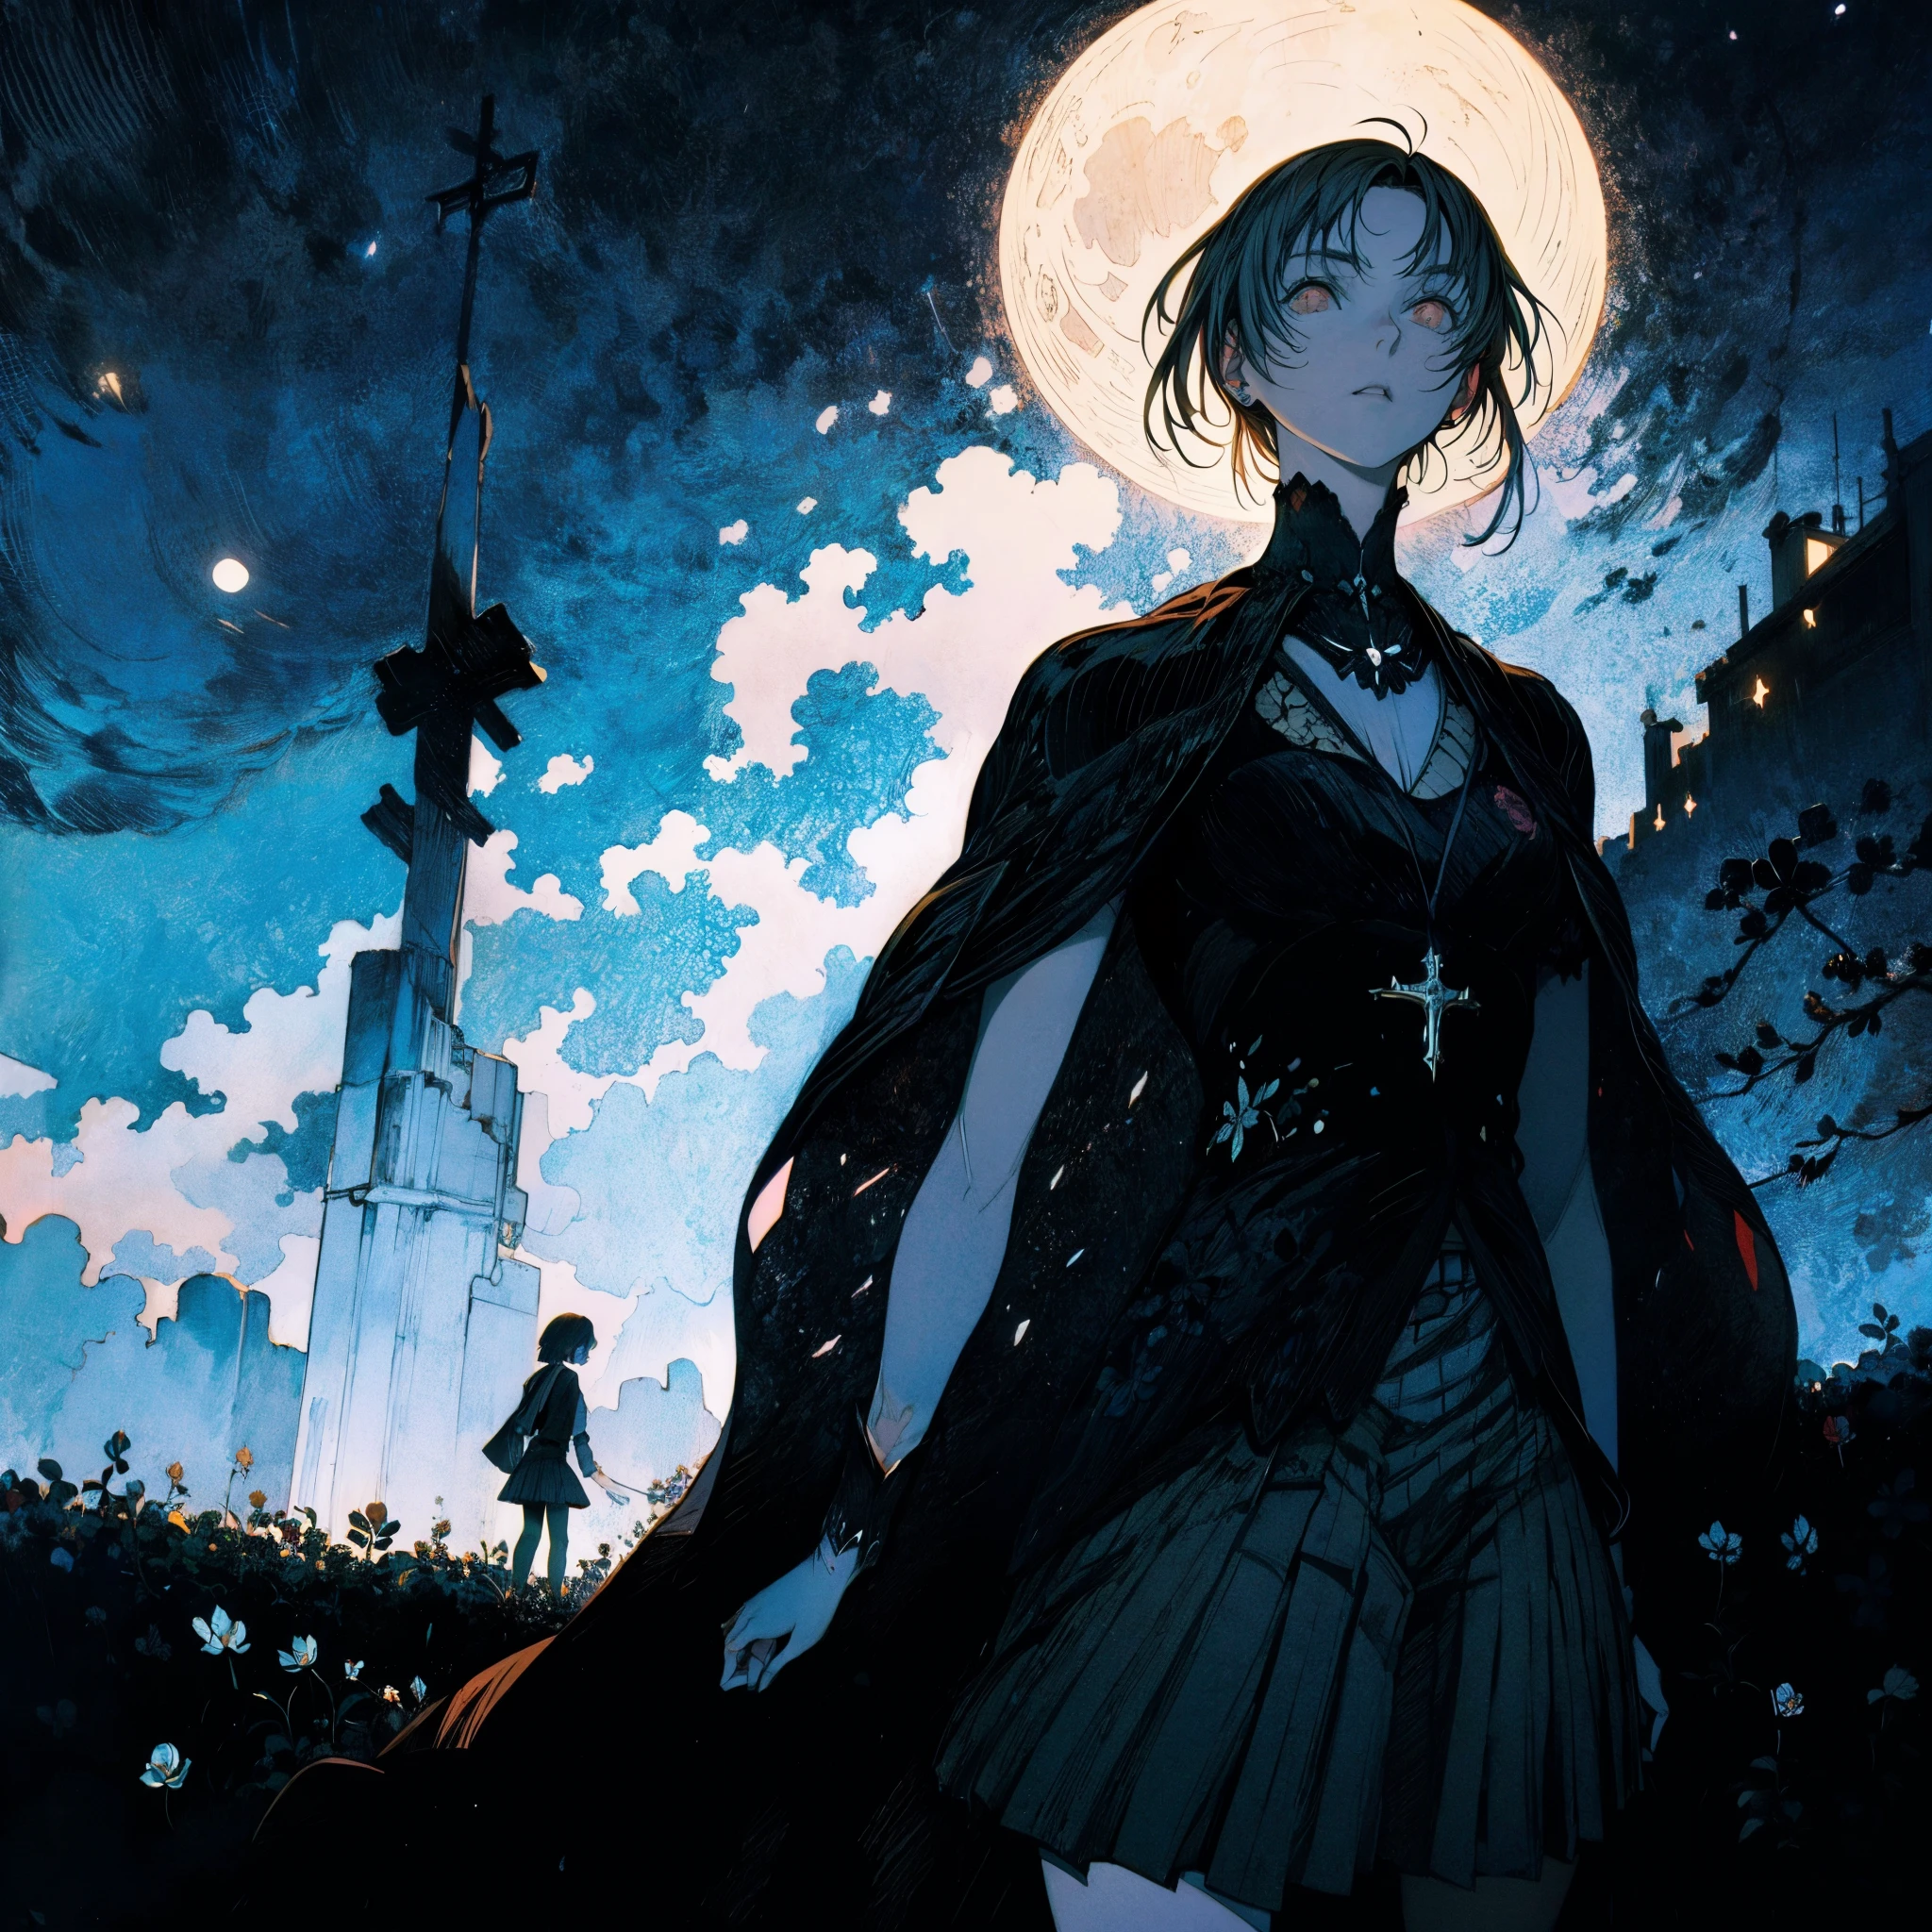 Create an image in the style of Kyle Thompson, featuring an anime-style girl character. She stands in an abandoned park filled with black roses, symbolizing death. The scene is illuminated by moonlight, which adds depth to the image. Use shallow focus to emphasize the girl and the immediate surroundings, while the background softly blurs. In the foreground, include the shadow of a cross, adding a dramatic and symbolic element to the scene. The contrast between the photorealistic Kyle Thompson style setting and the anime-style character should be striking, effectively synthesizing the differences in artistic mediums.